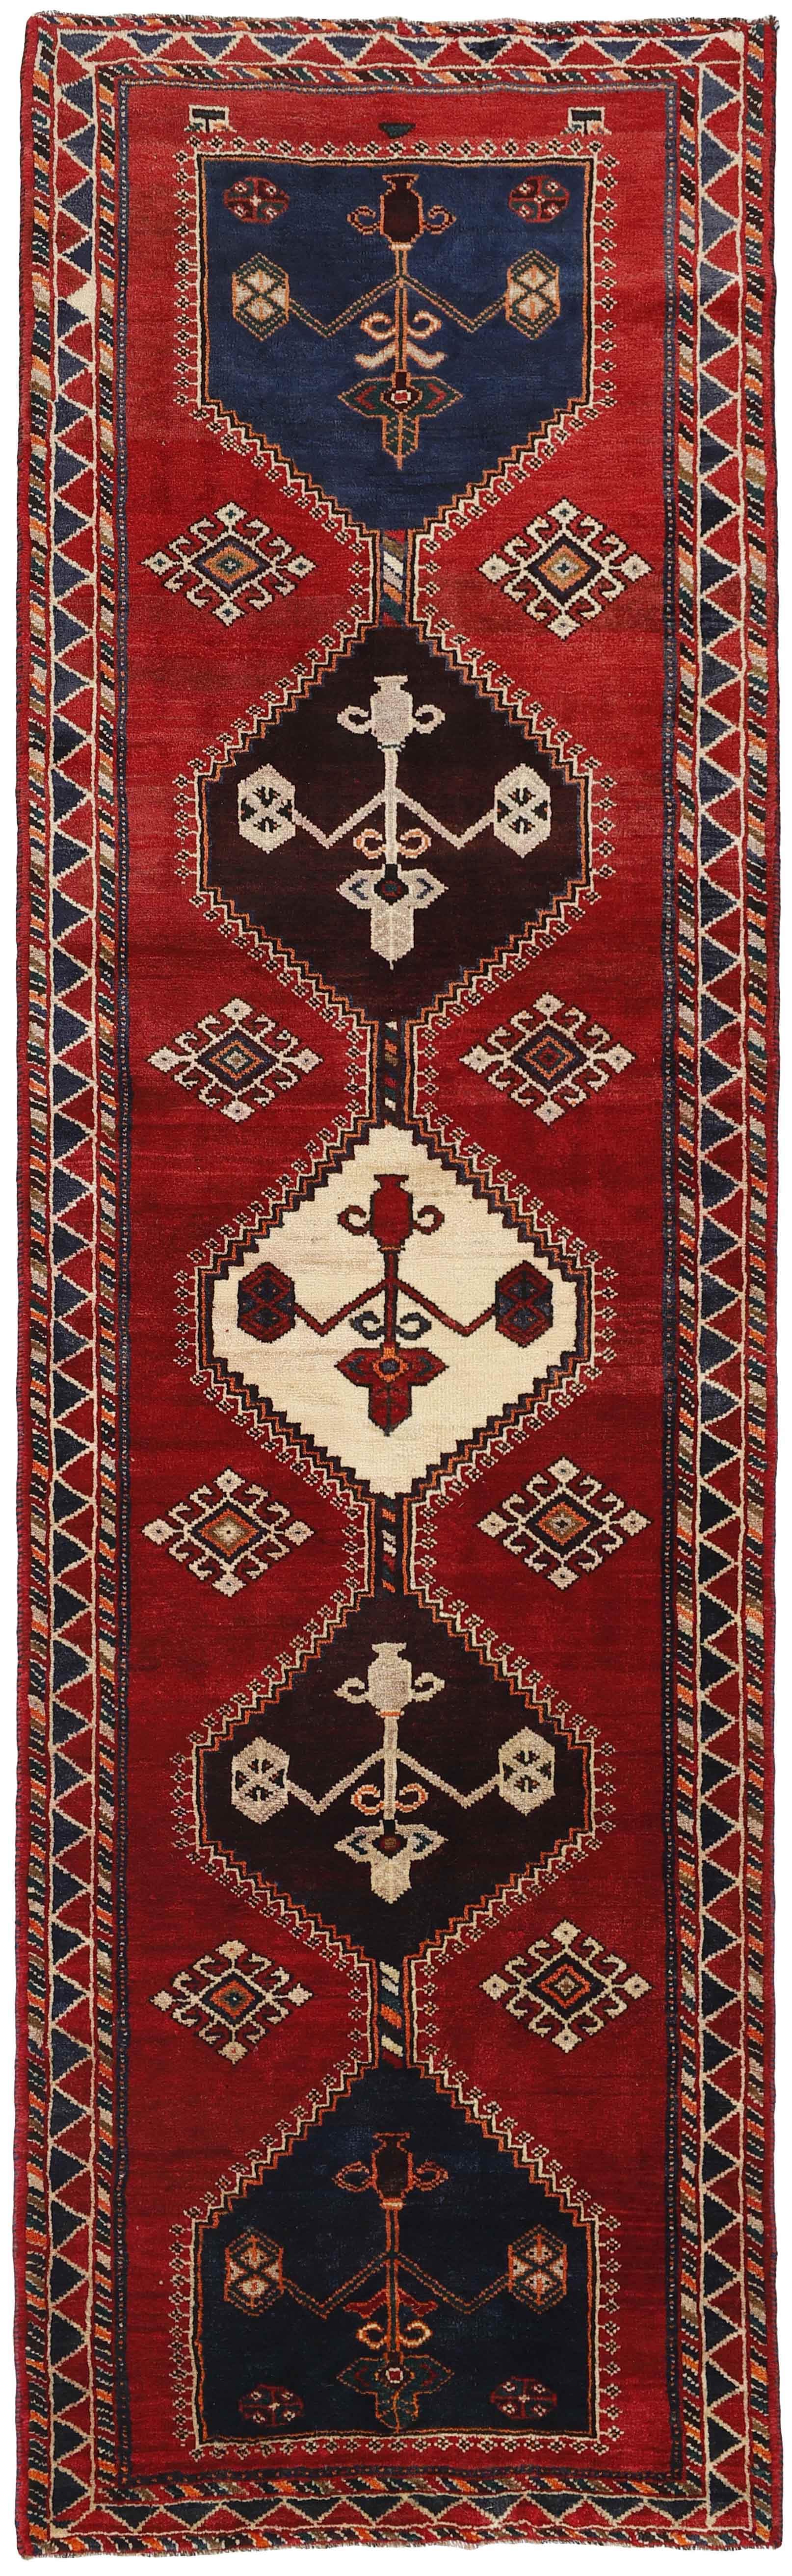 Authentic persian rug with a traditional tribal geometric pattern in red, beige and black